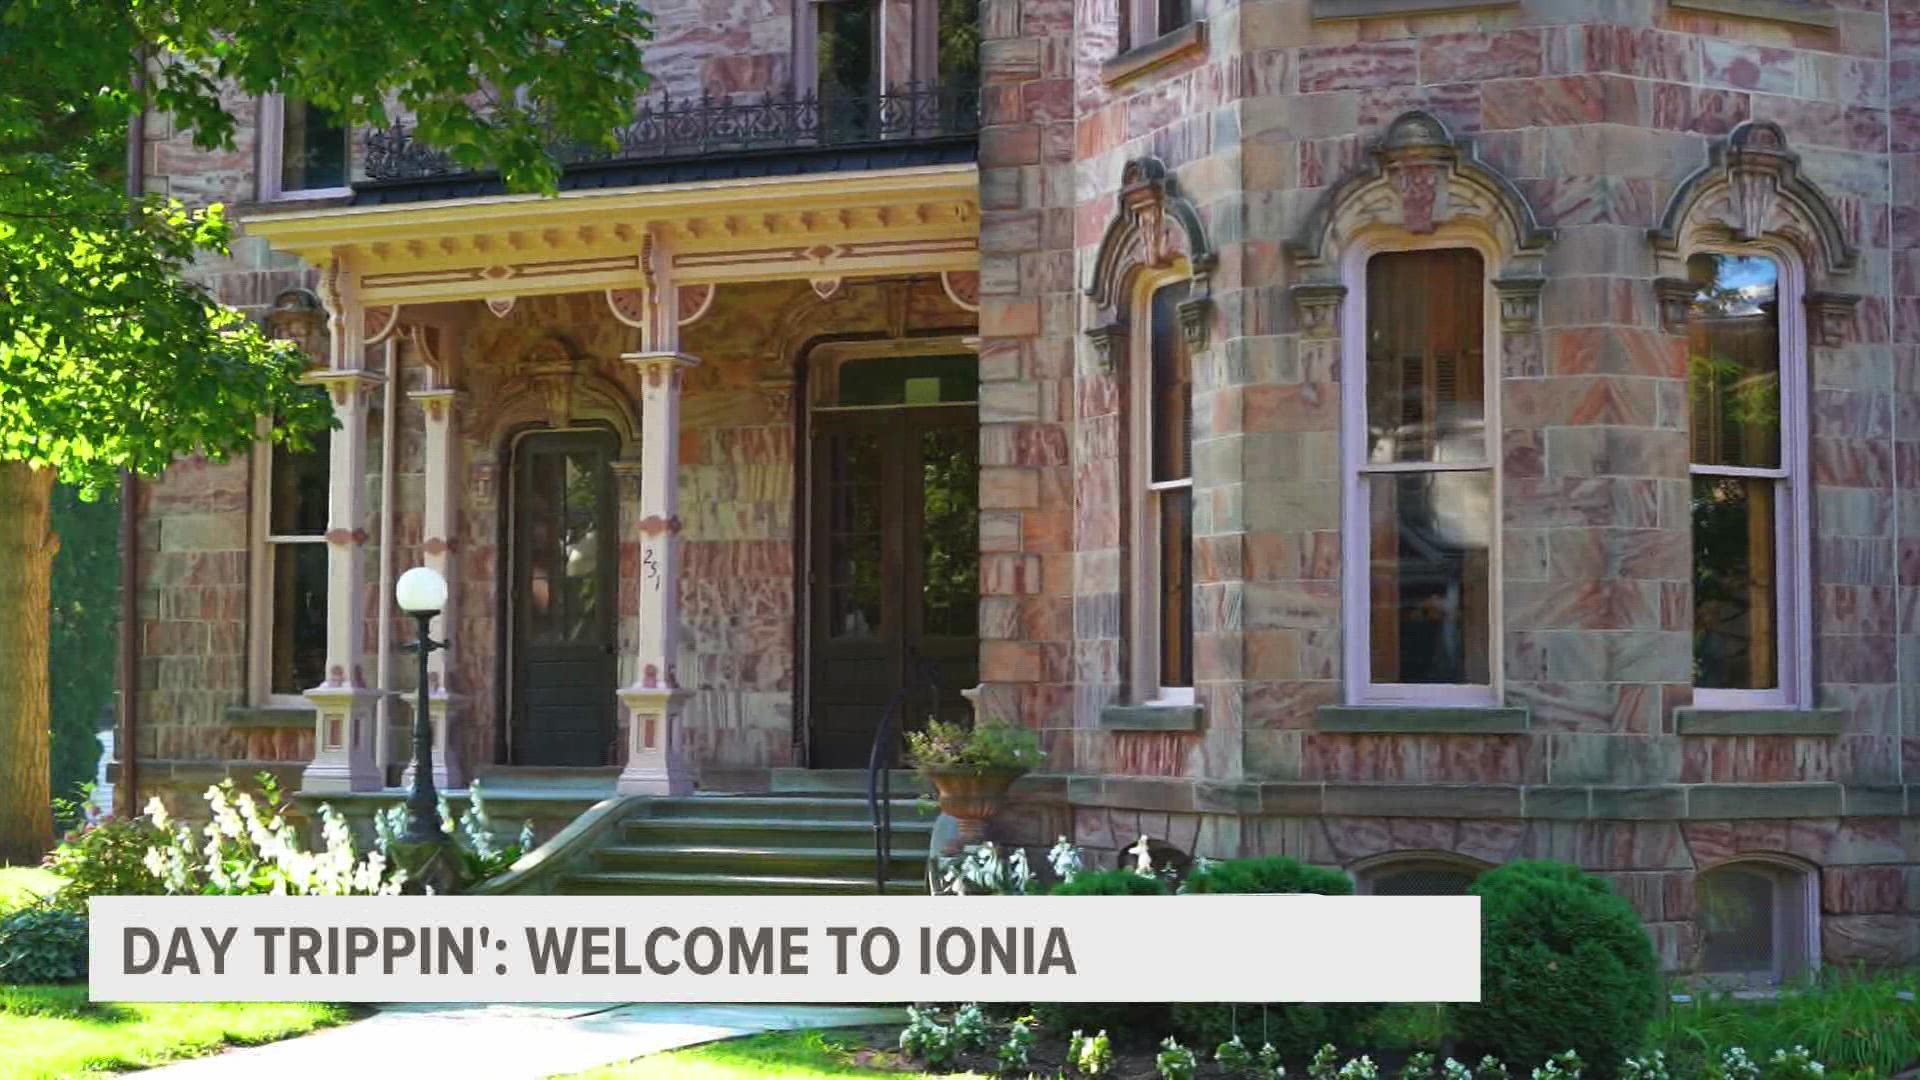 Join 13 ON YOUR SIDE's Samantha Jacques as she explores all that Ionia has to offer.